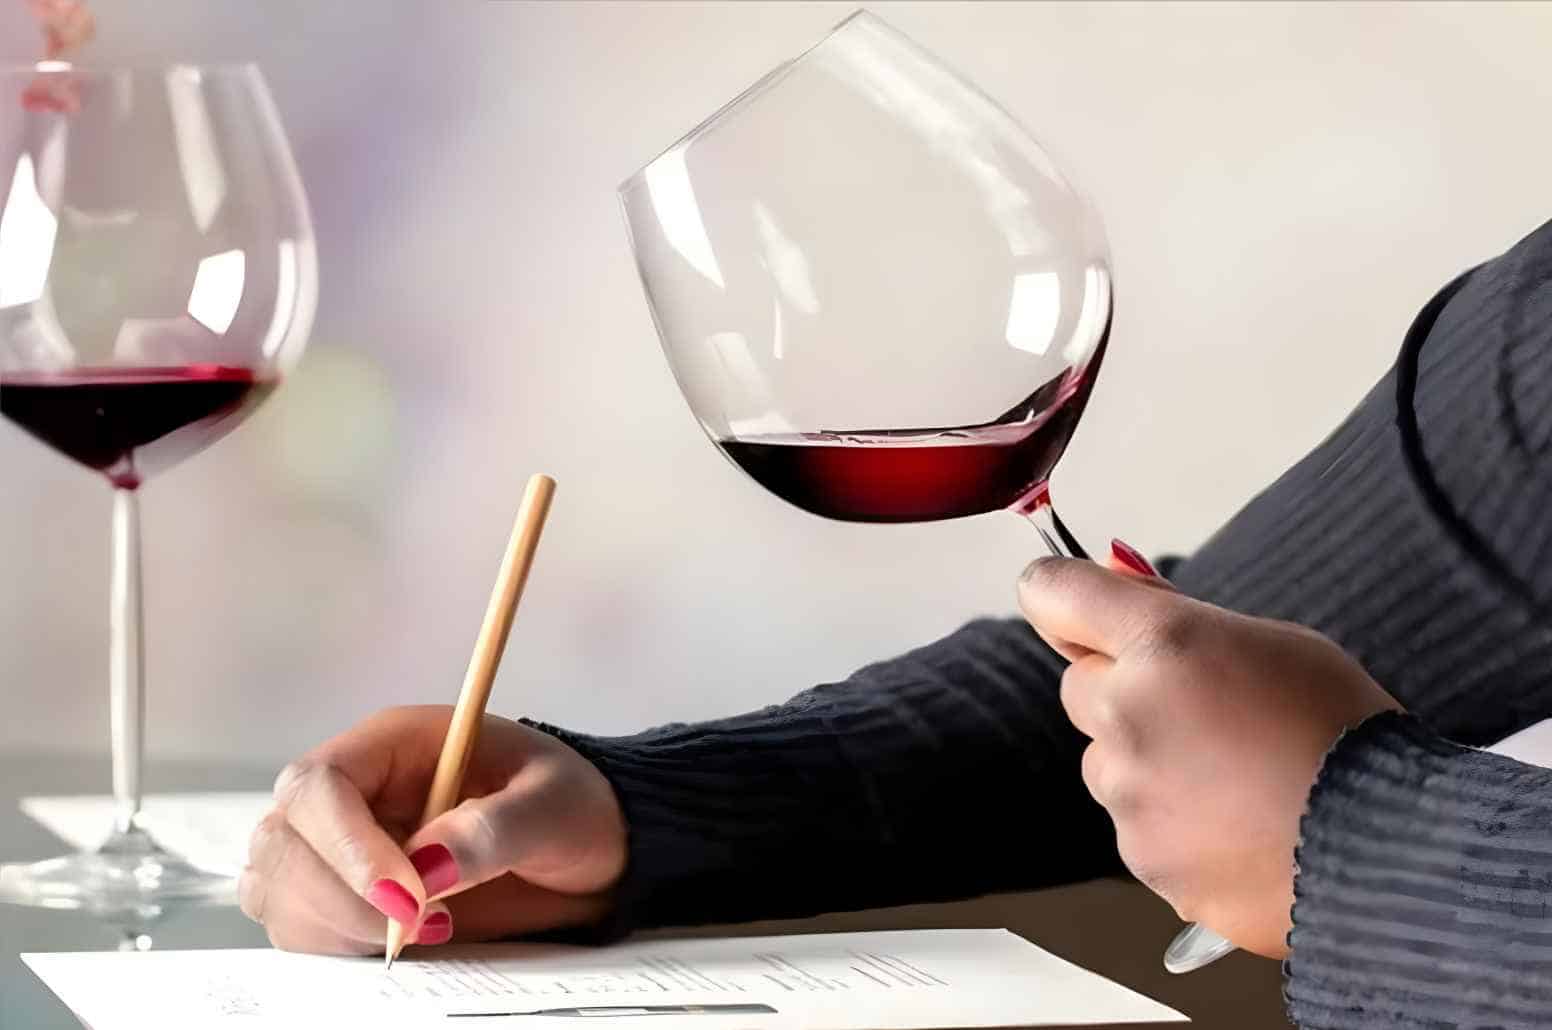 Expand your Knowledge of Wine